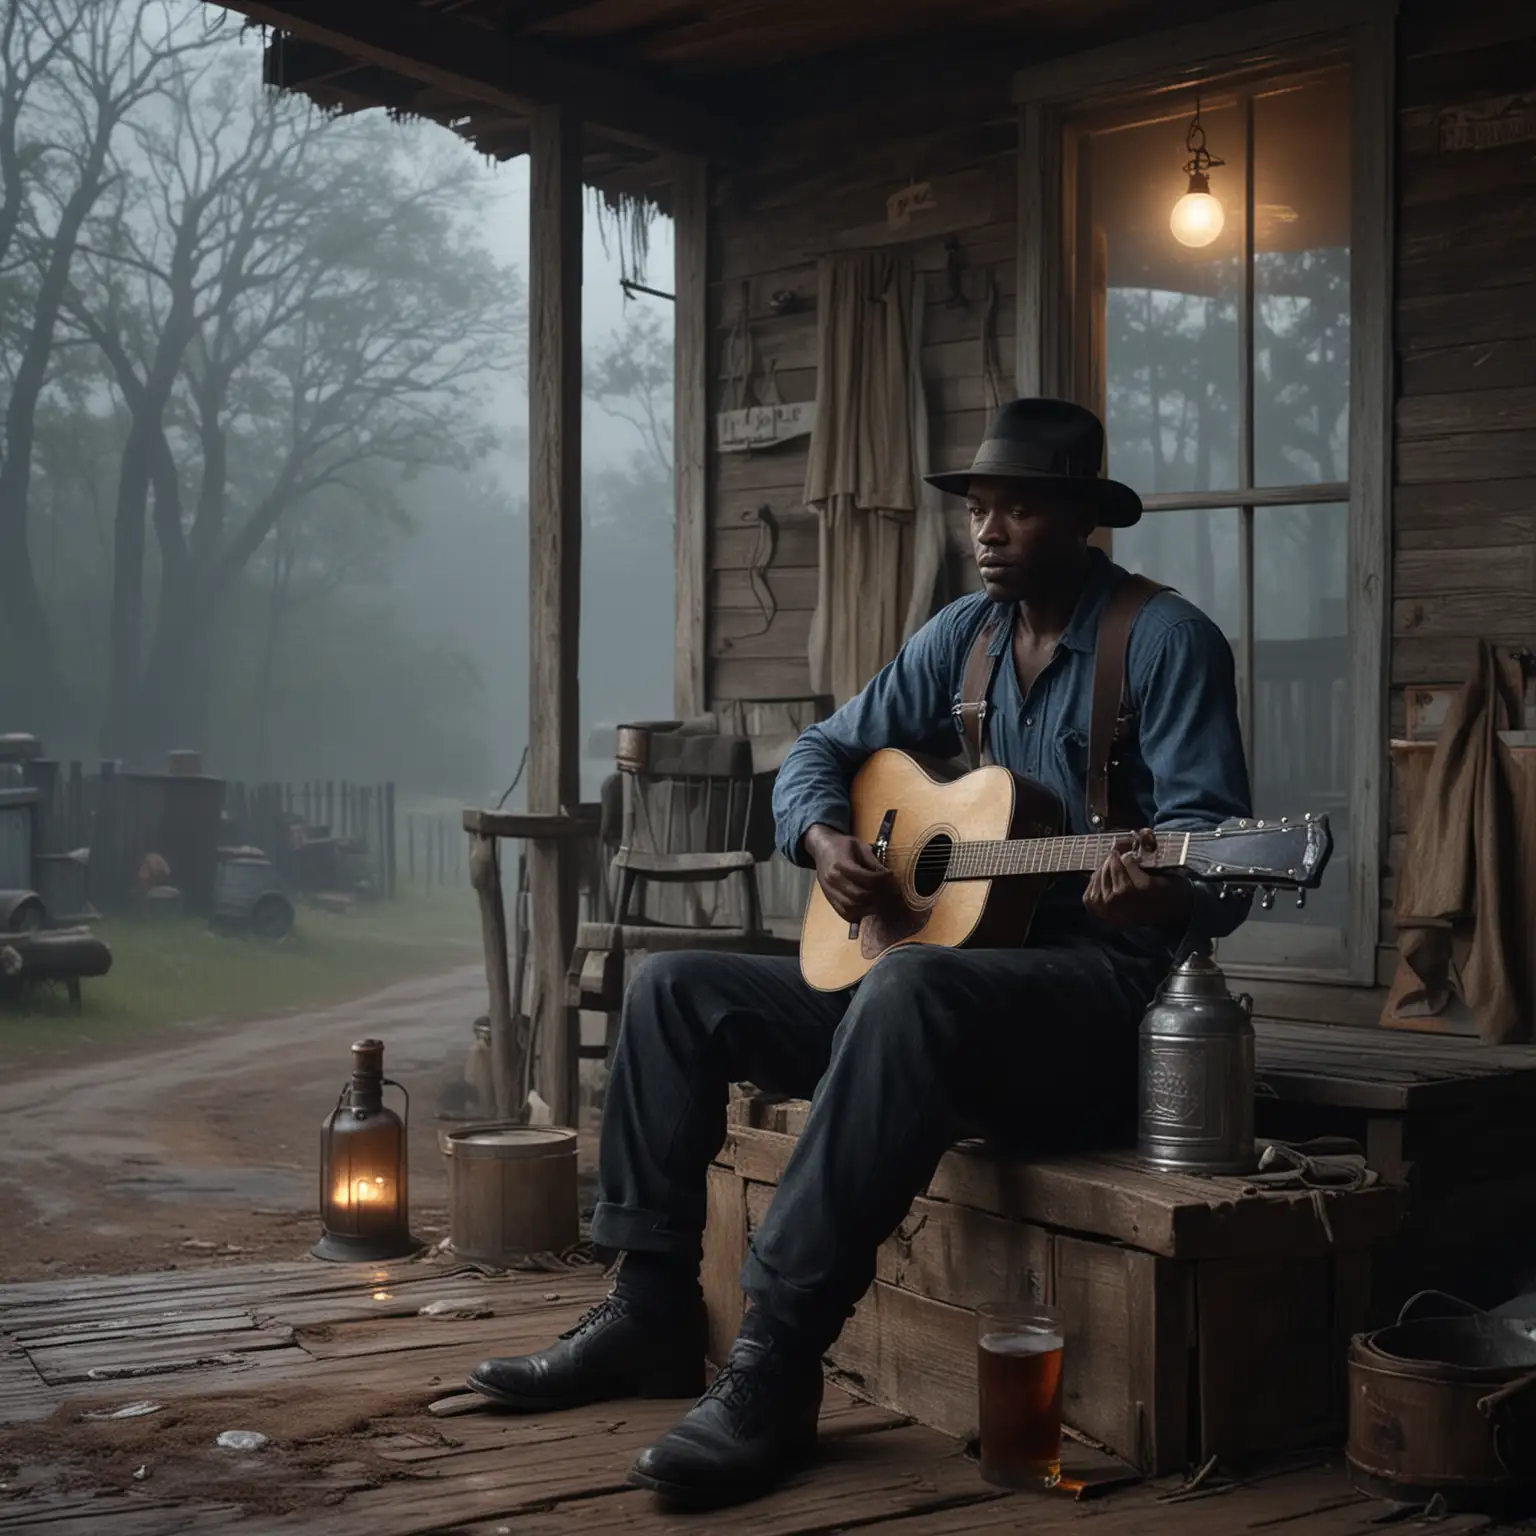 Hyperrealistic 8K cinematic, Black Blues guitarist sitting on a porch of a roadside shack, misty evening,1930's deep South, whiskey jug sits on the floor next to him. The image should be of him and the shack.